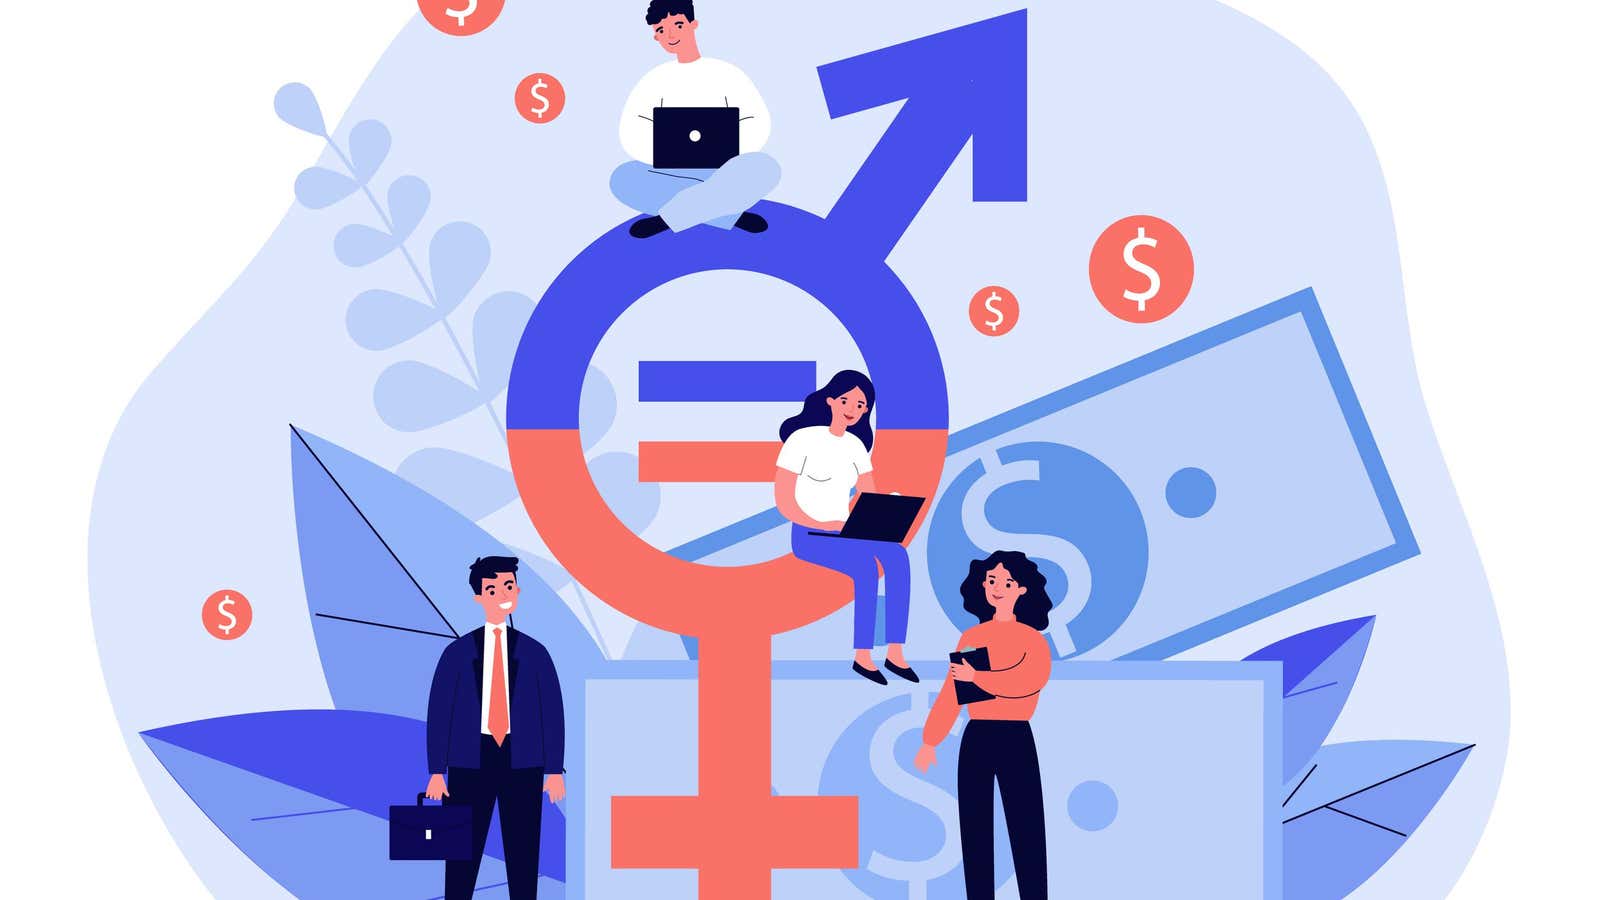 7 questions to audit the pay gap at your company